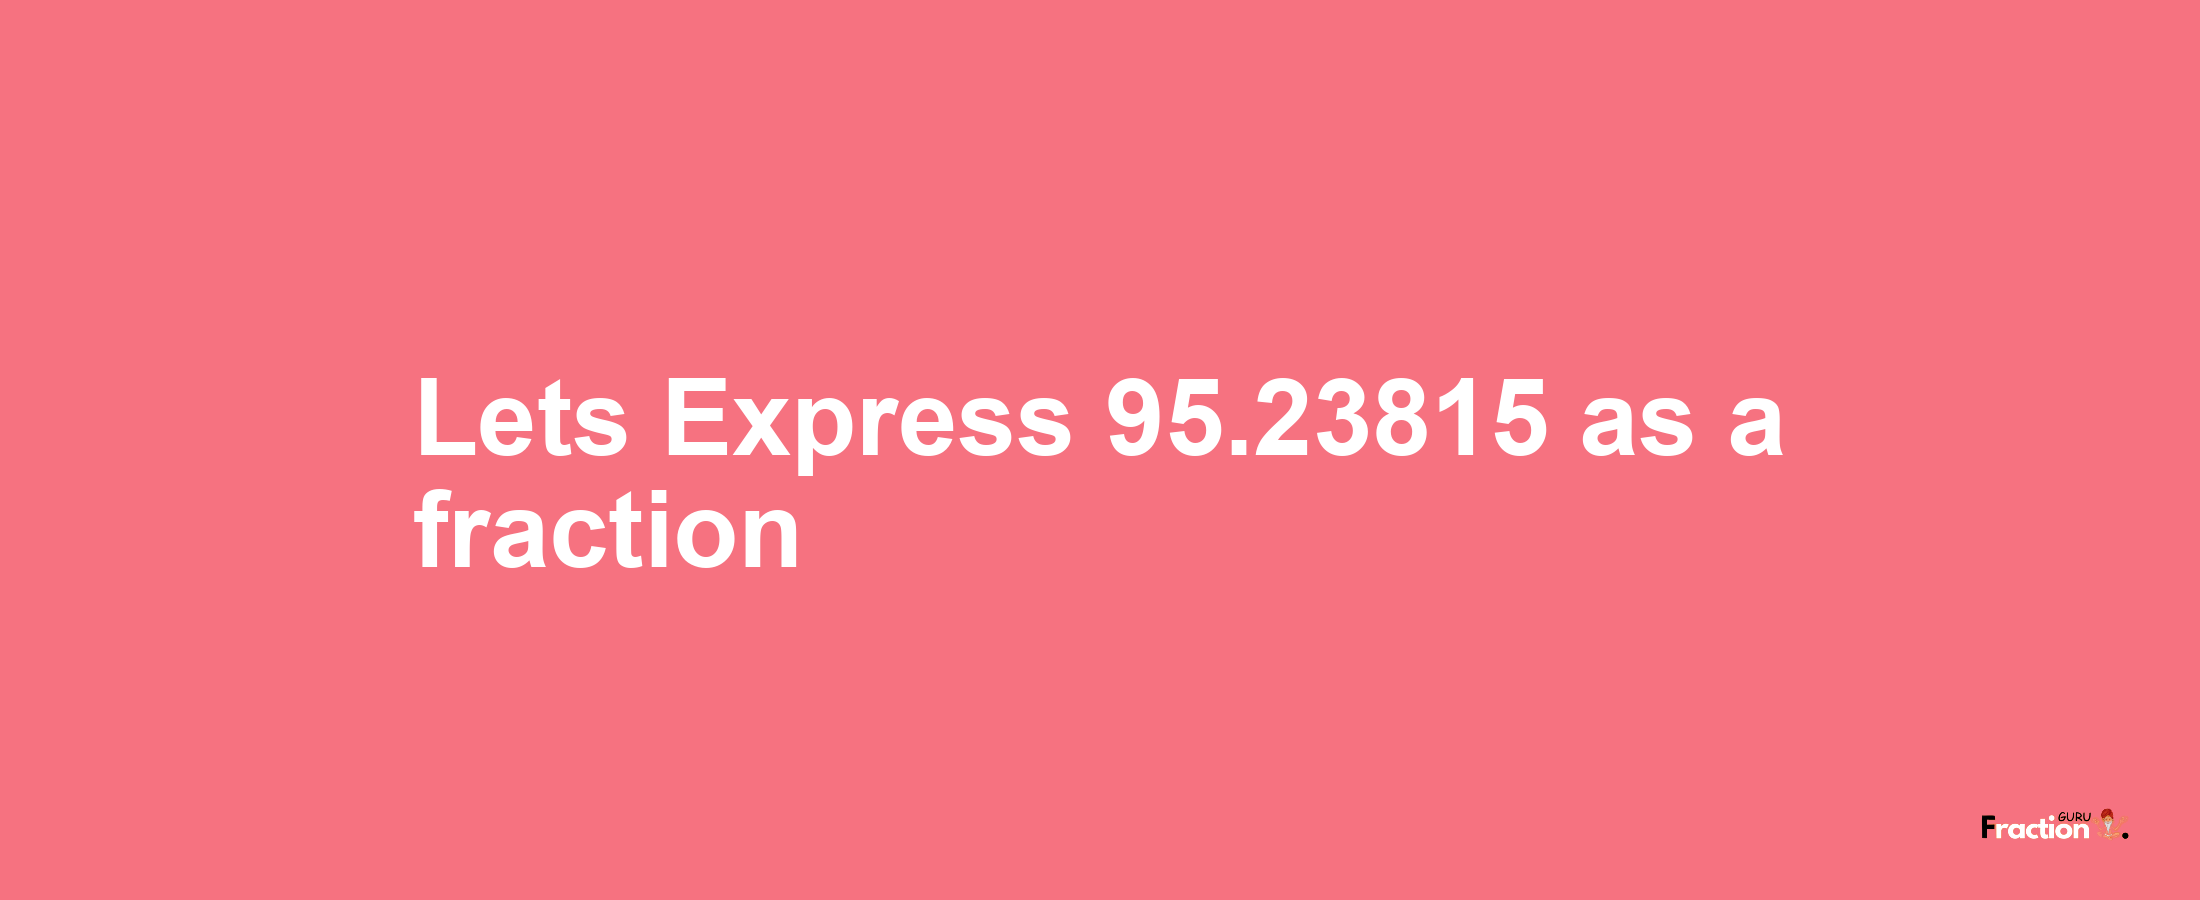 Lets Express 95.23815 as afraction